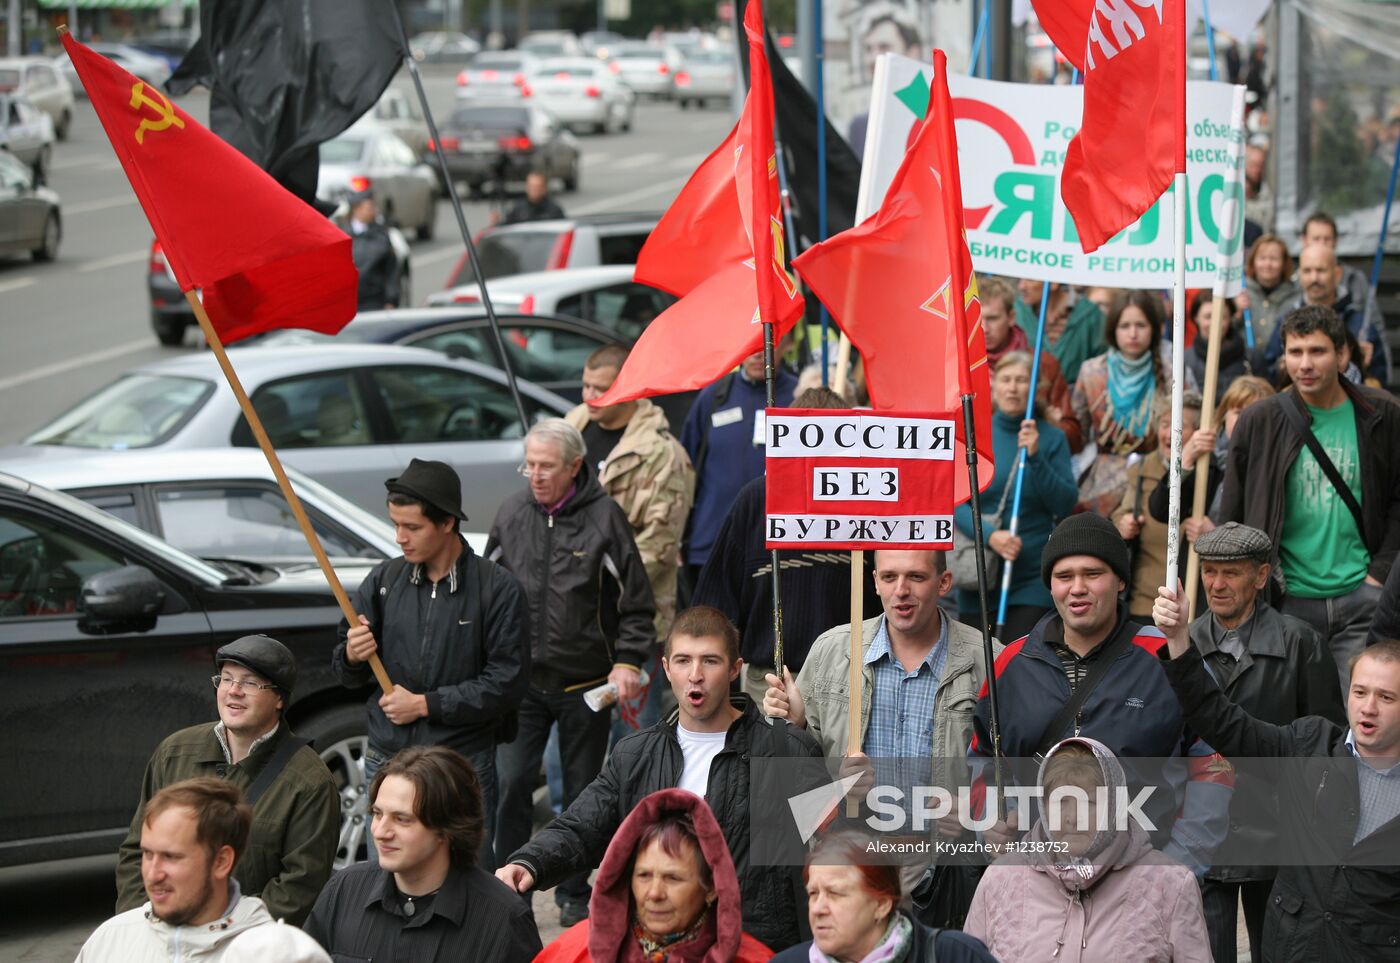 Opposition rally in Novosibirsk